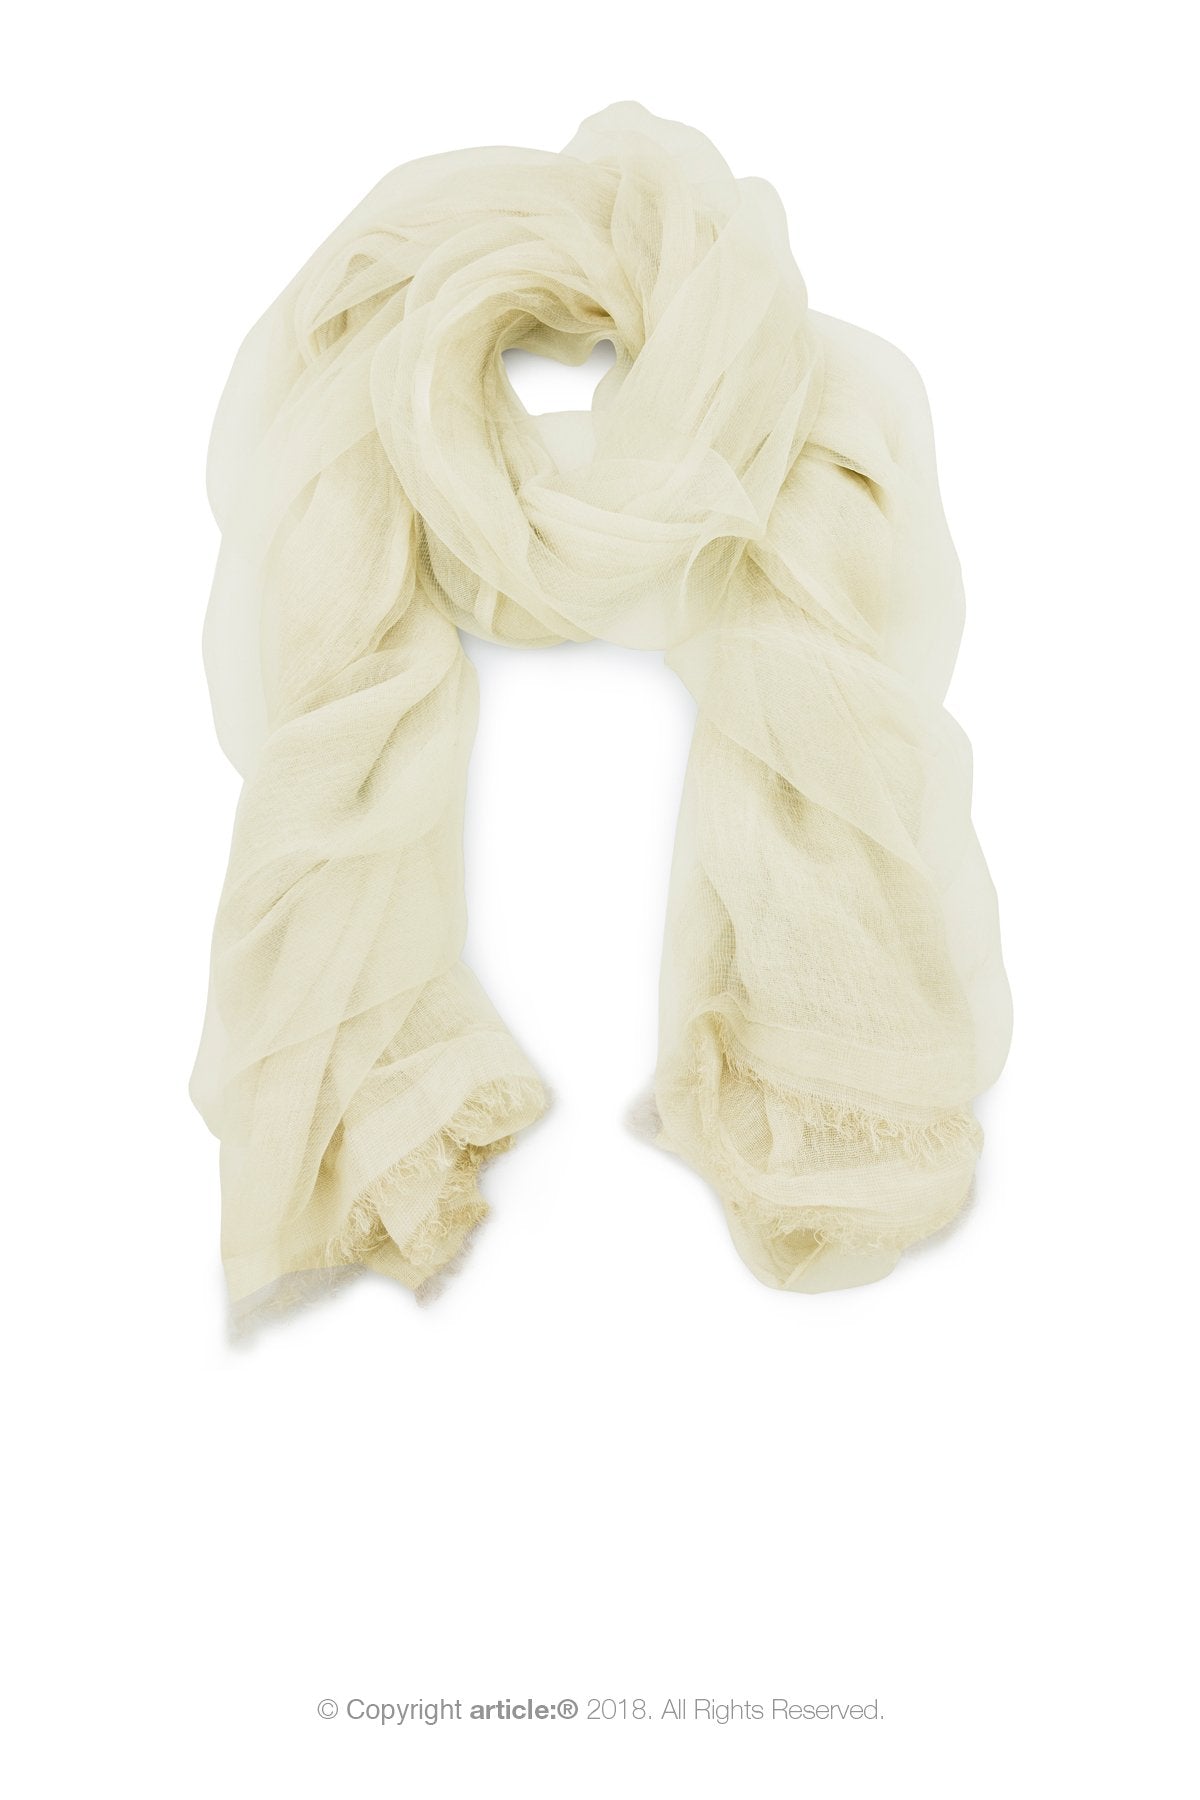 article: #900 Scarf / Wrap - Oyster